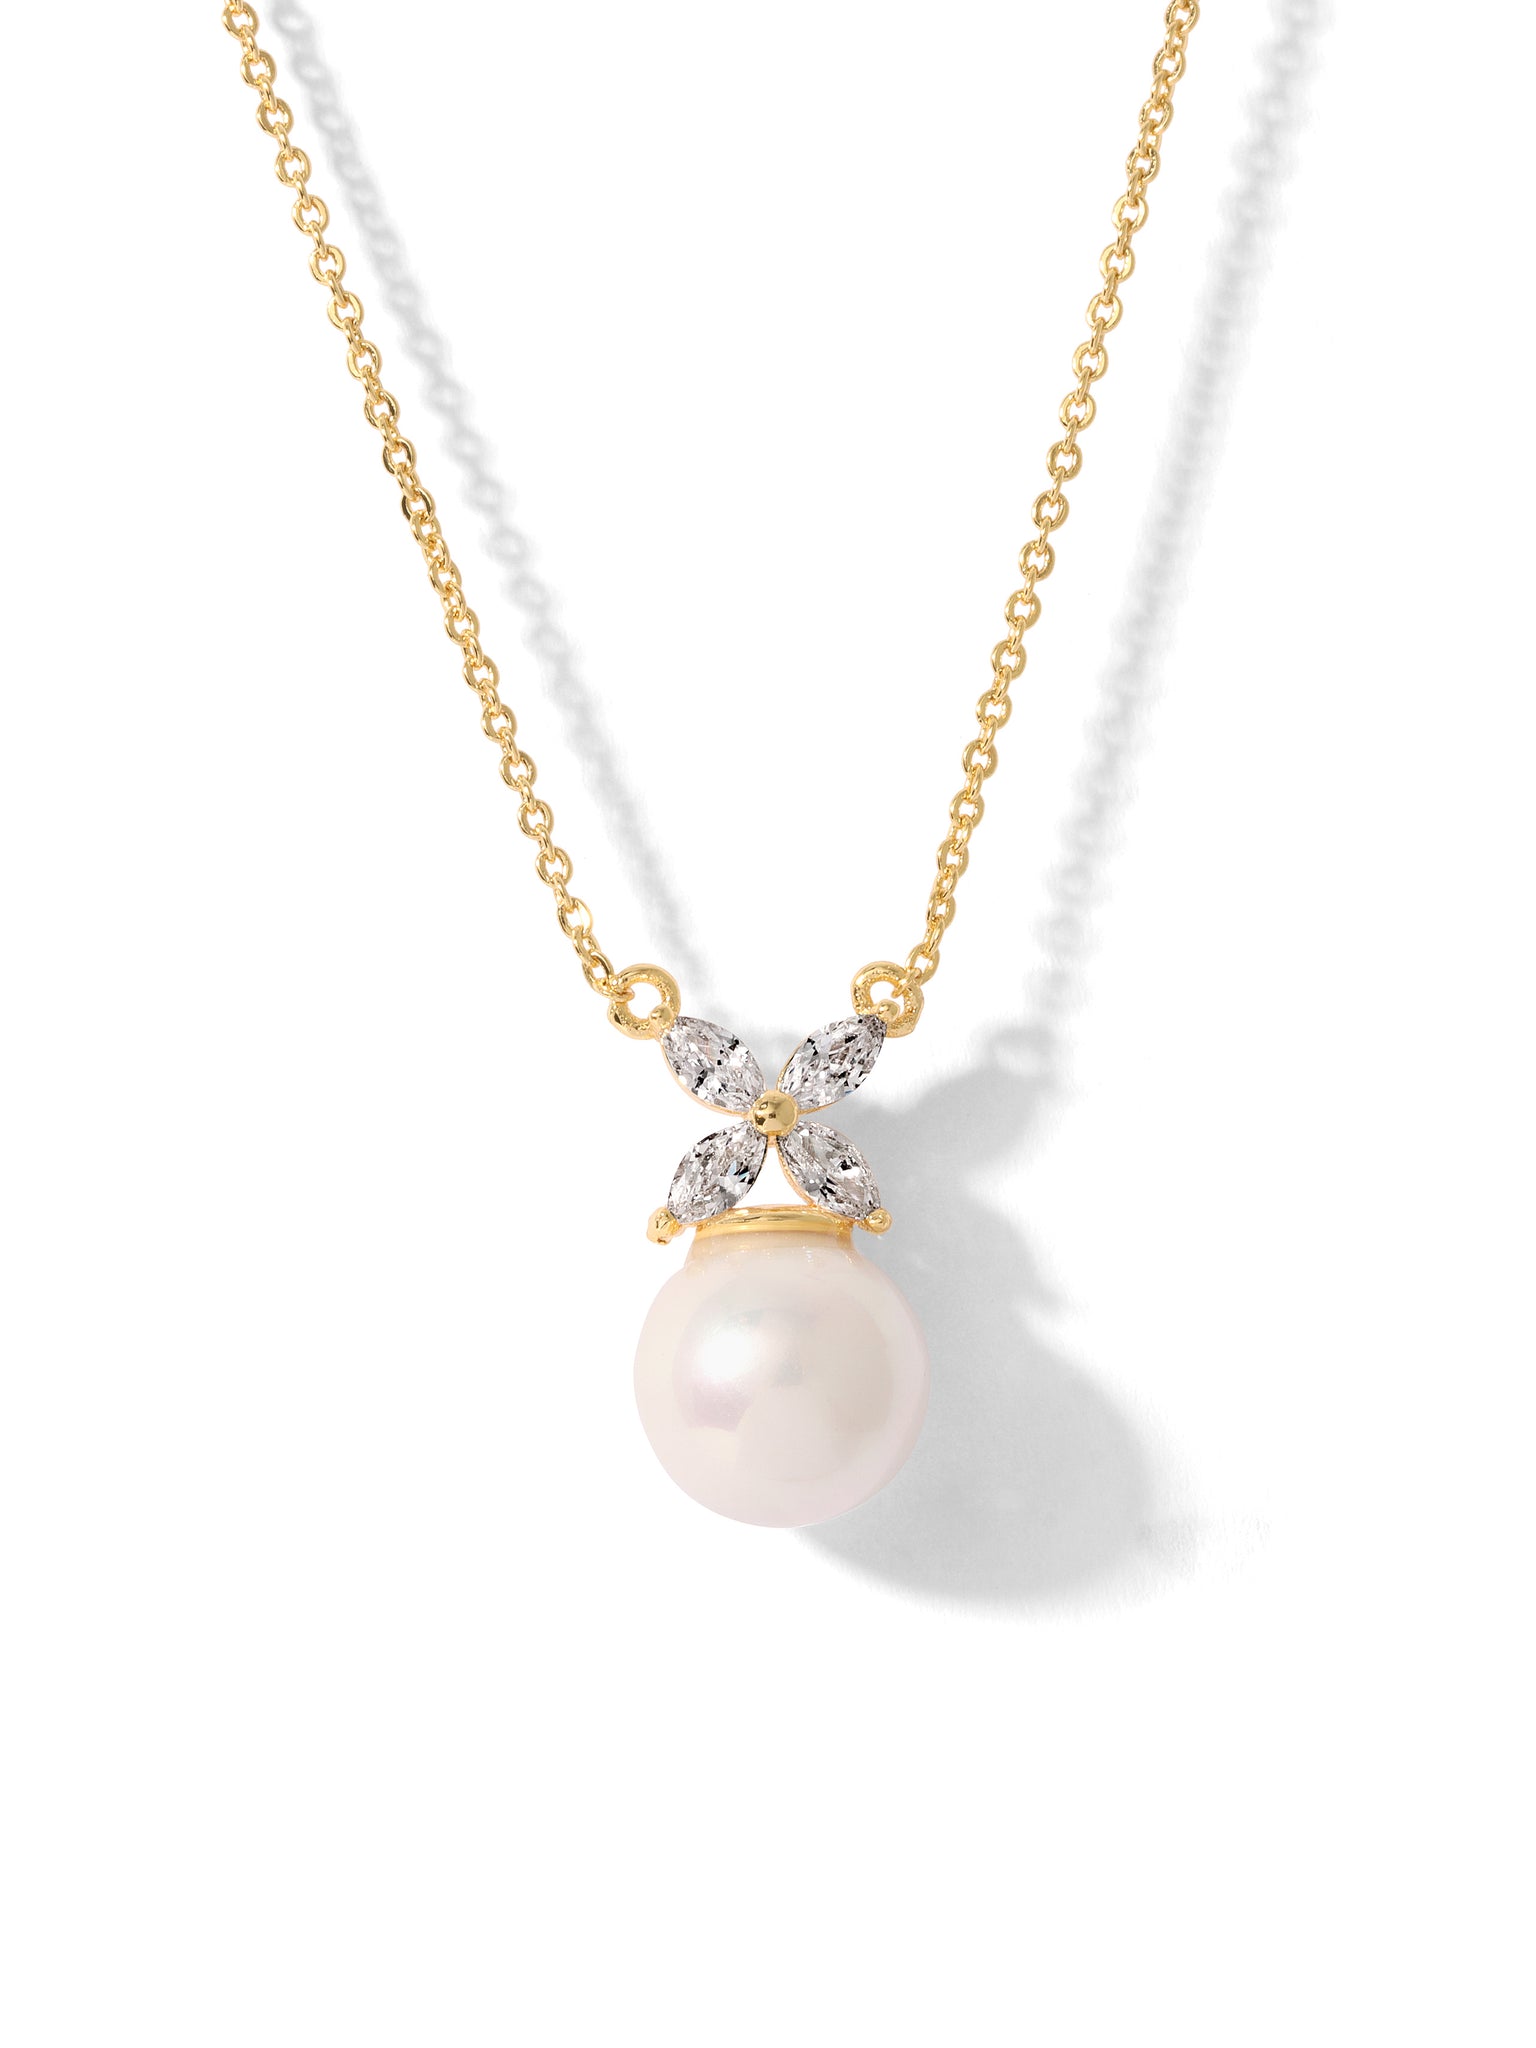 The Mirabel Pearl Necklace